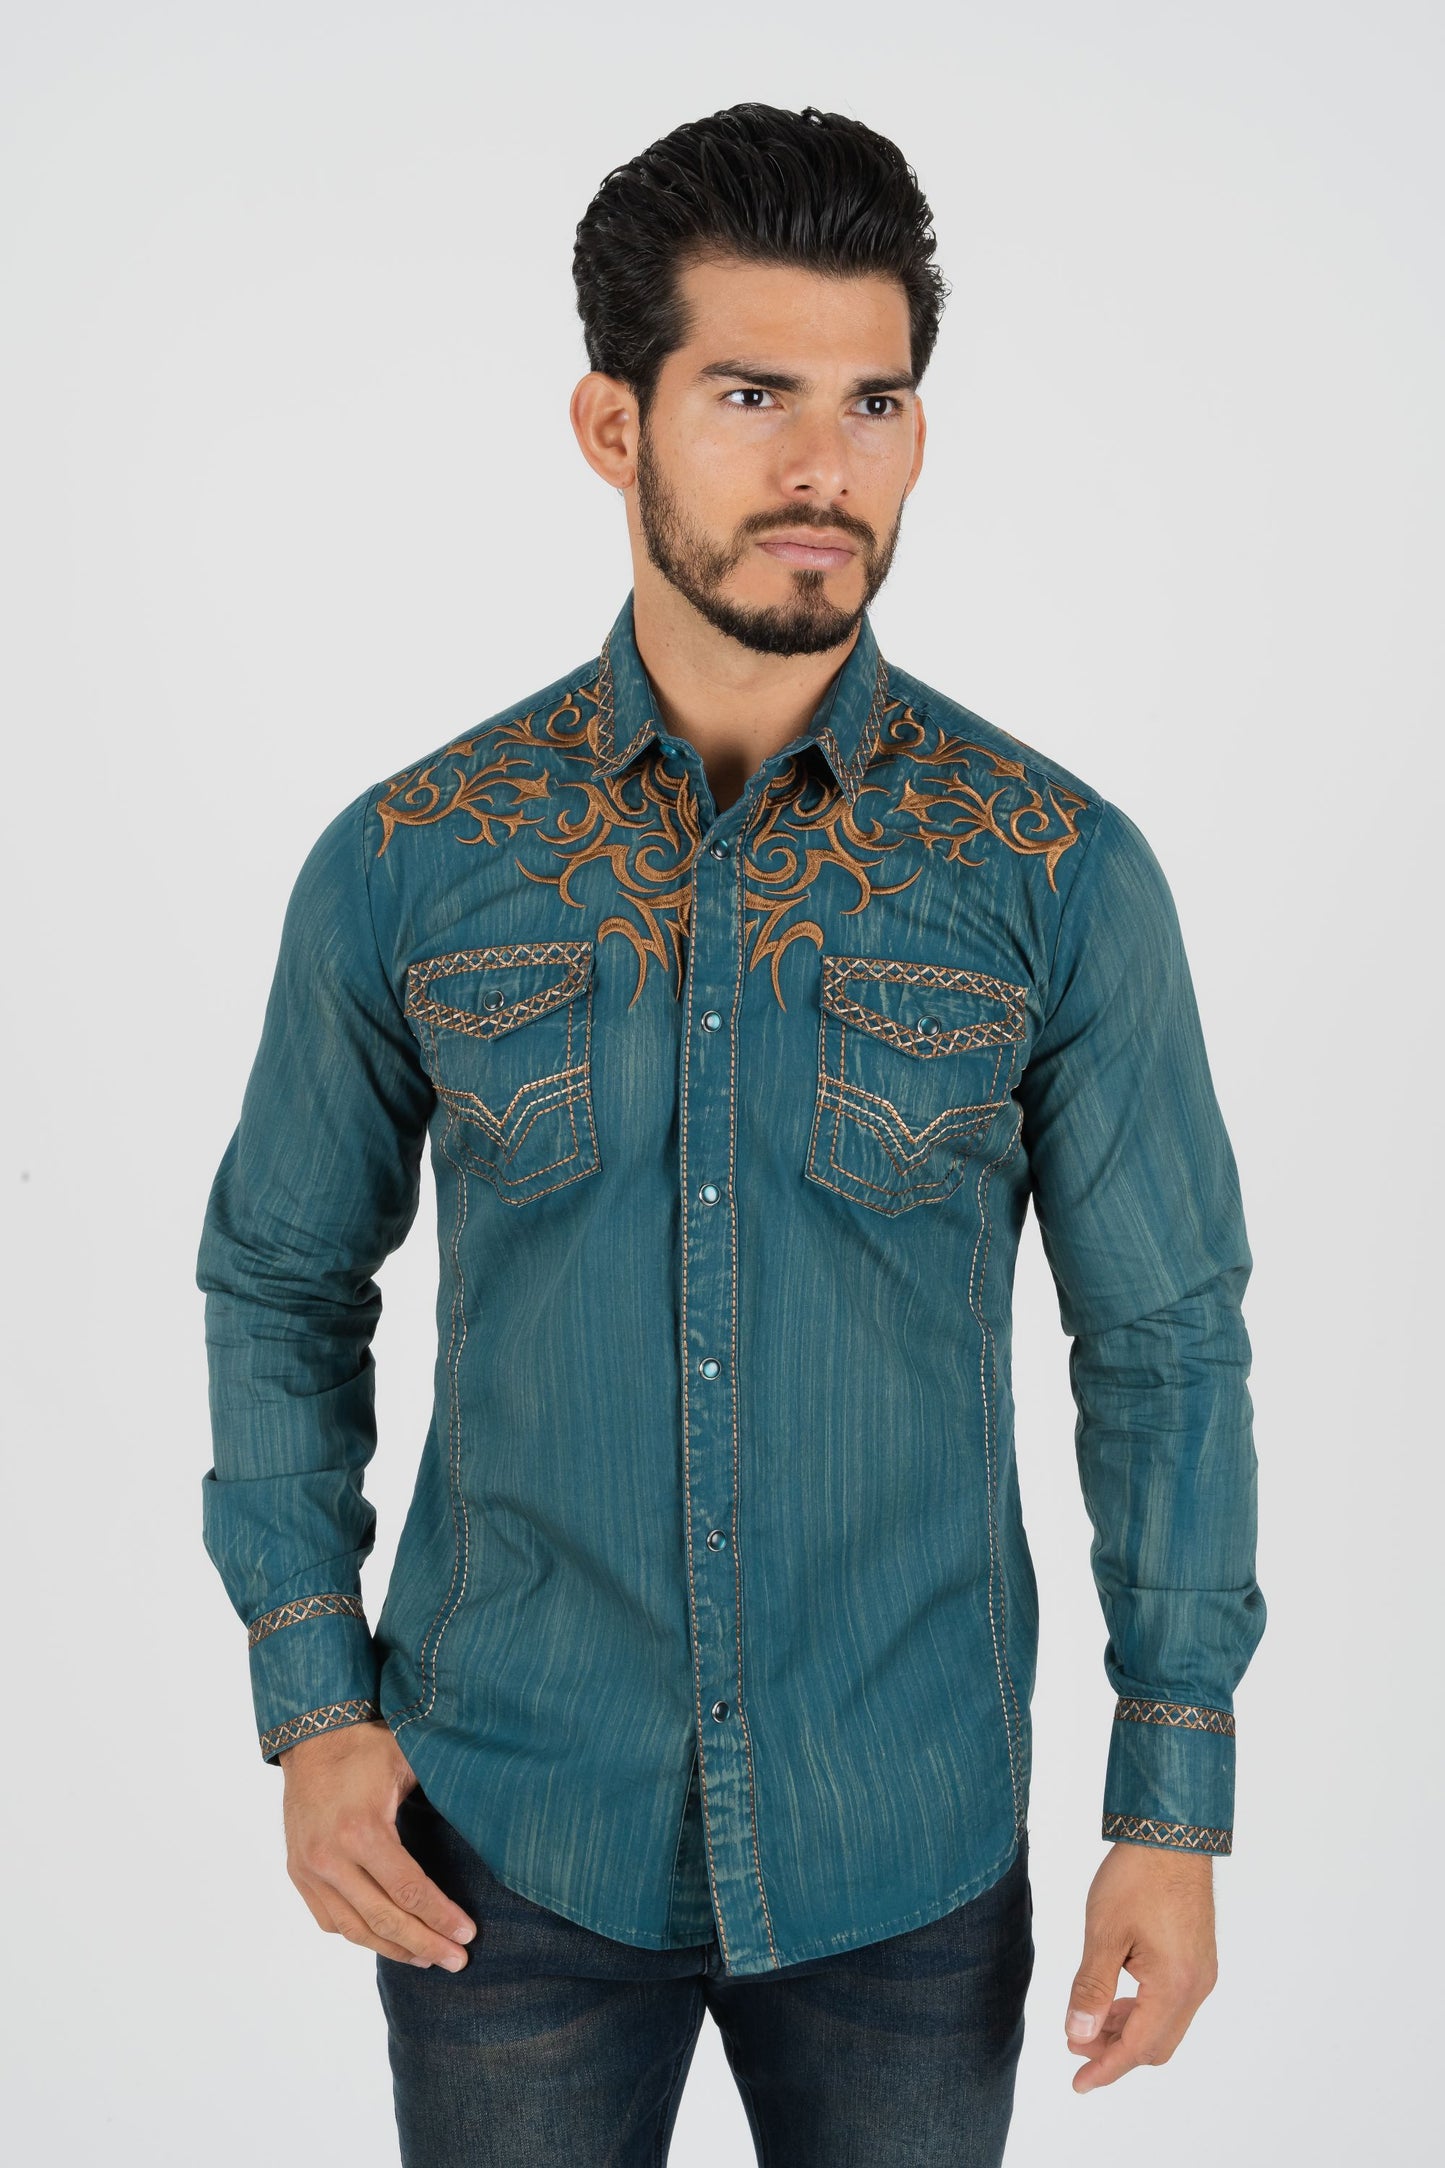 Men's Cotton Teal Embroidery Western Shirt